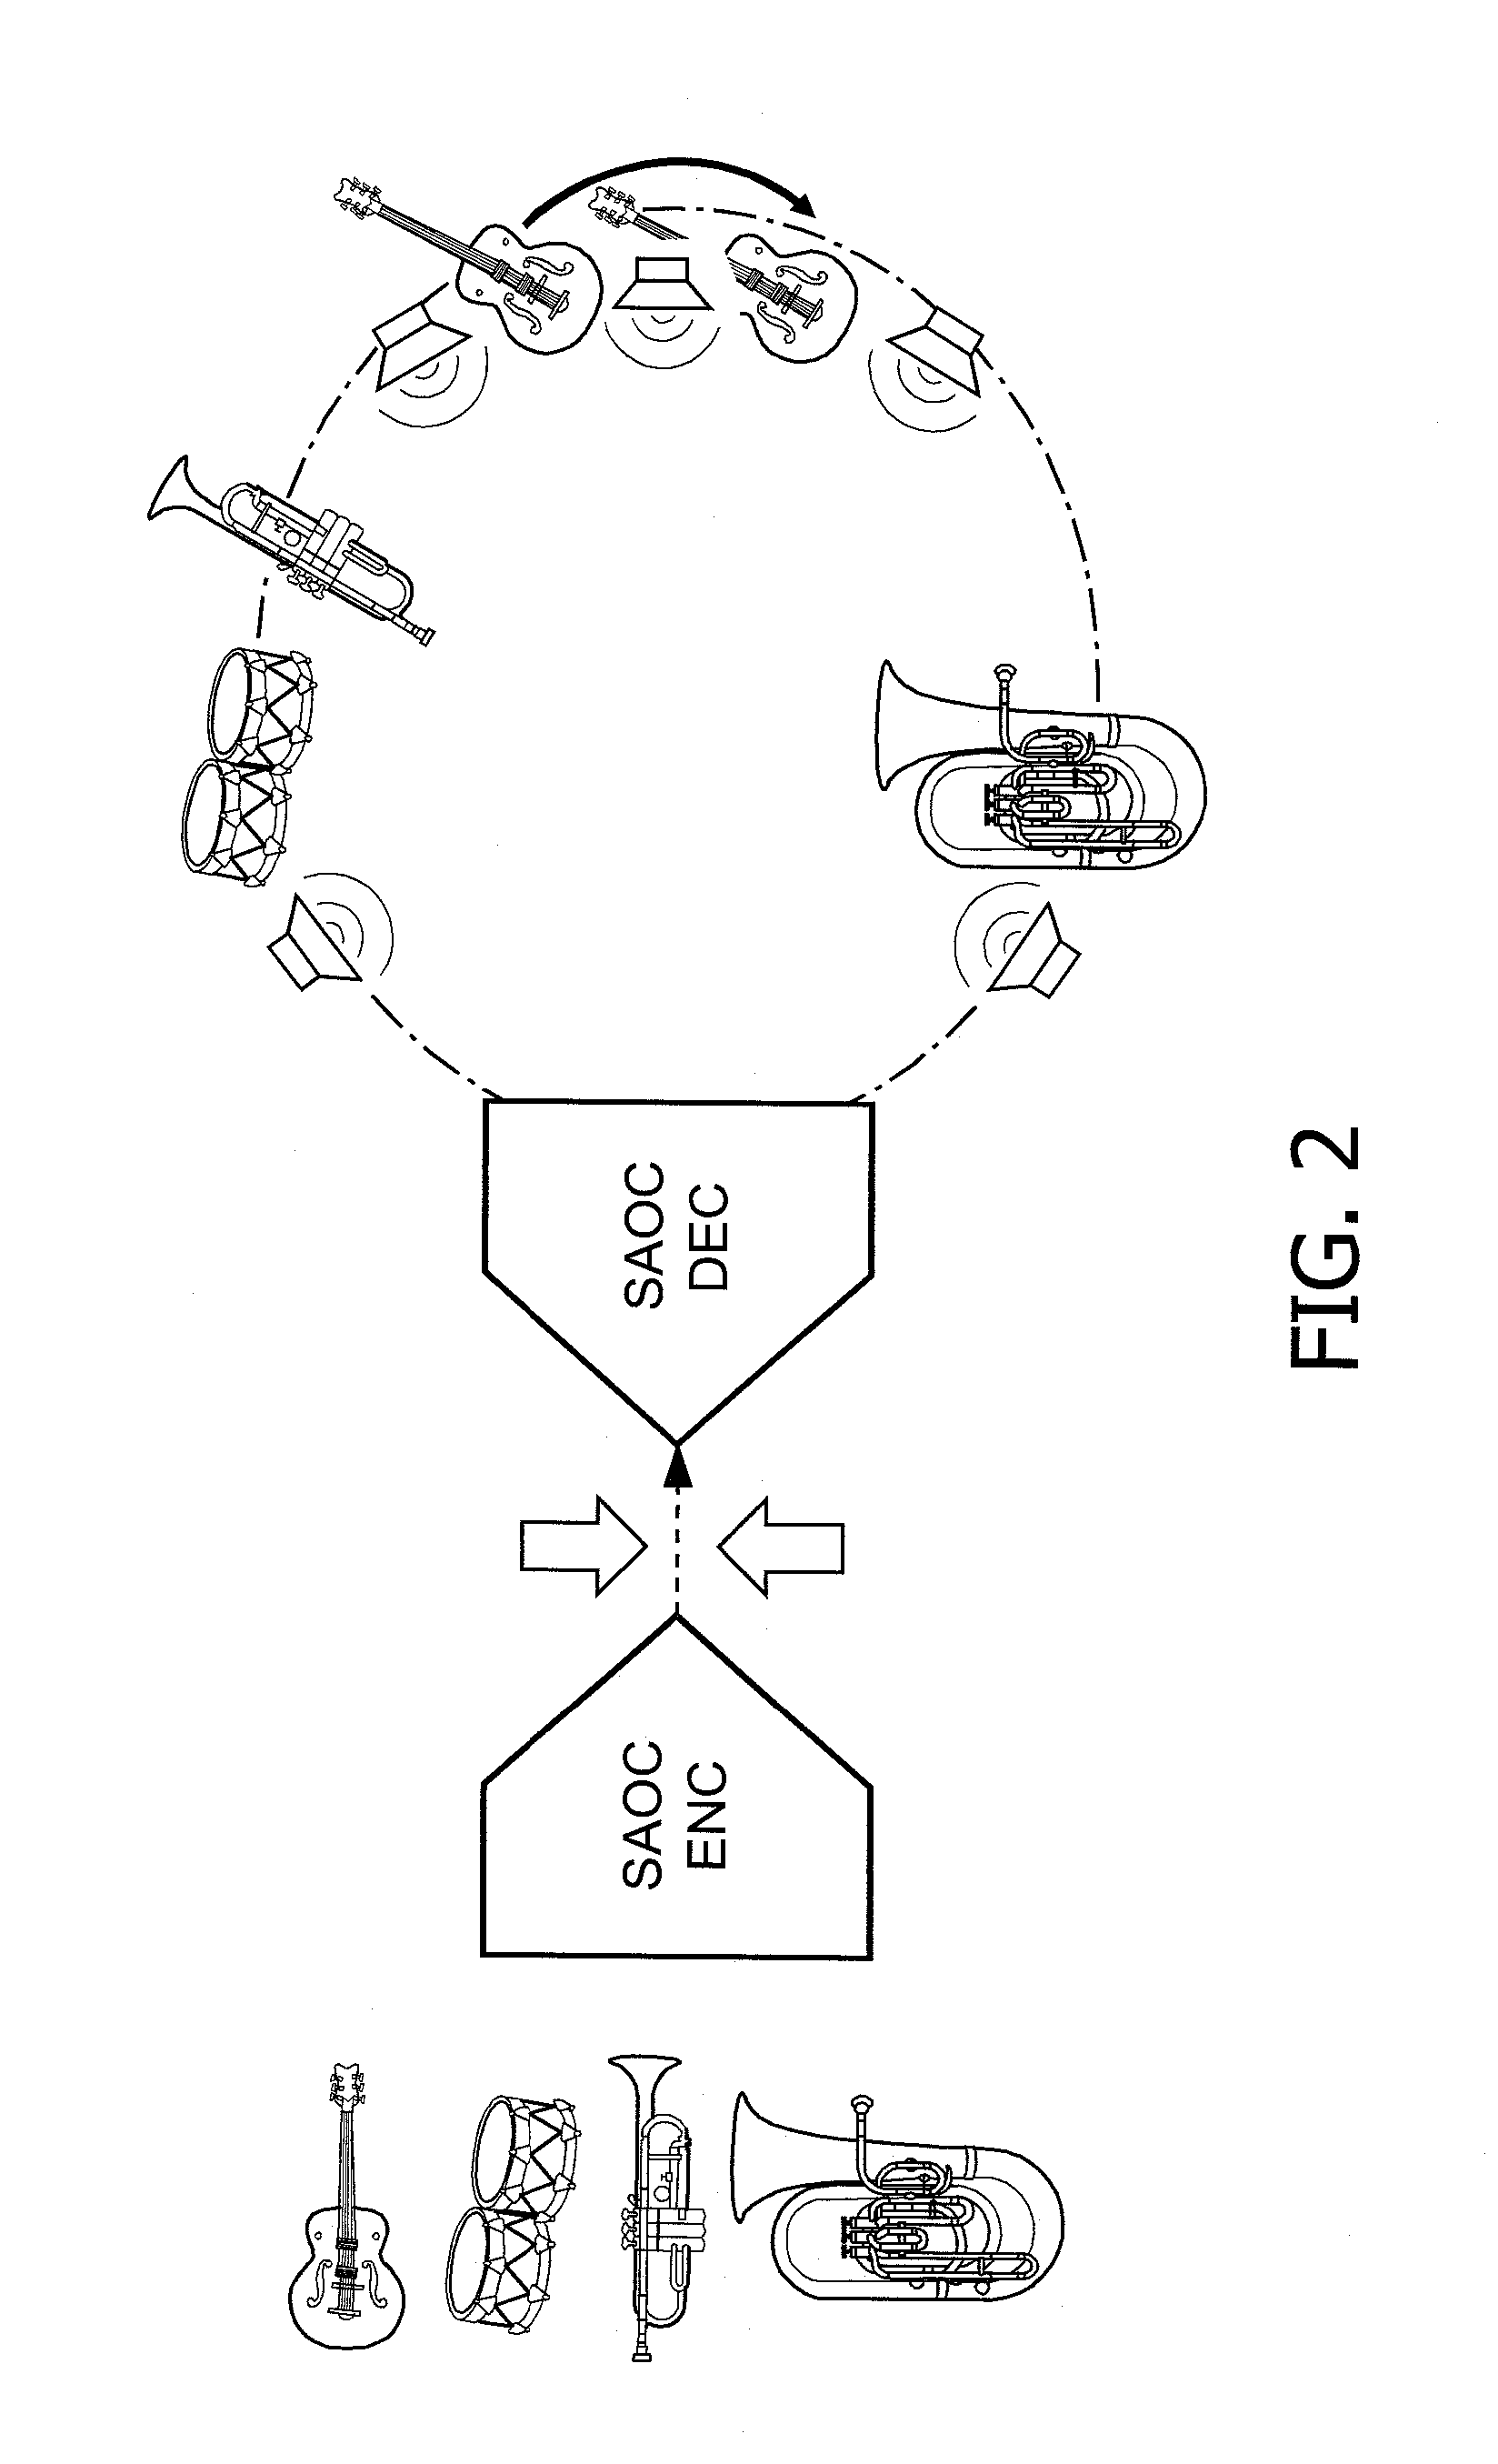 An audio apparatus and method therefor